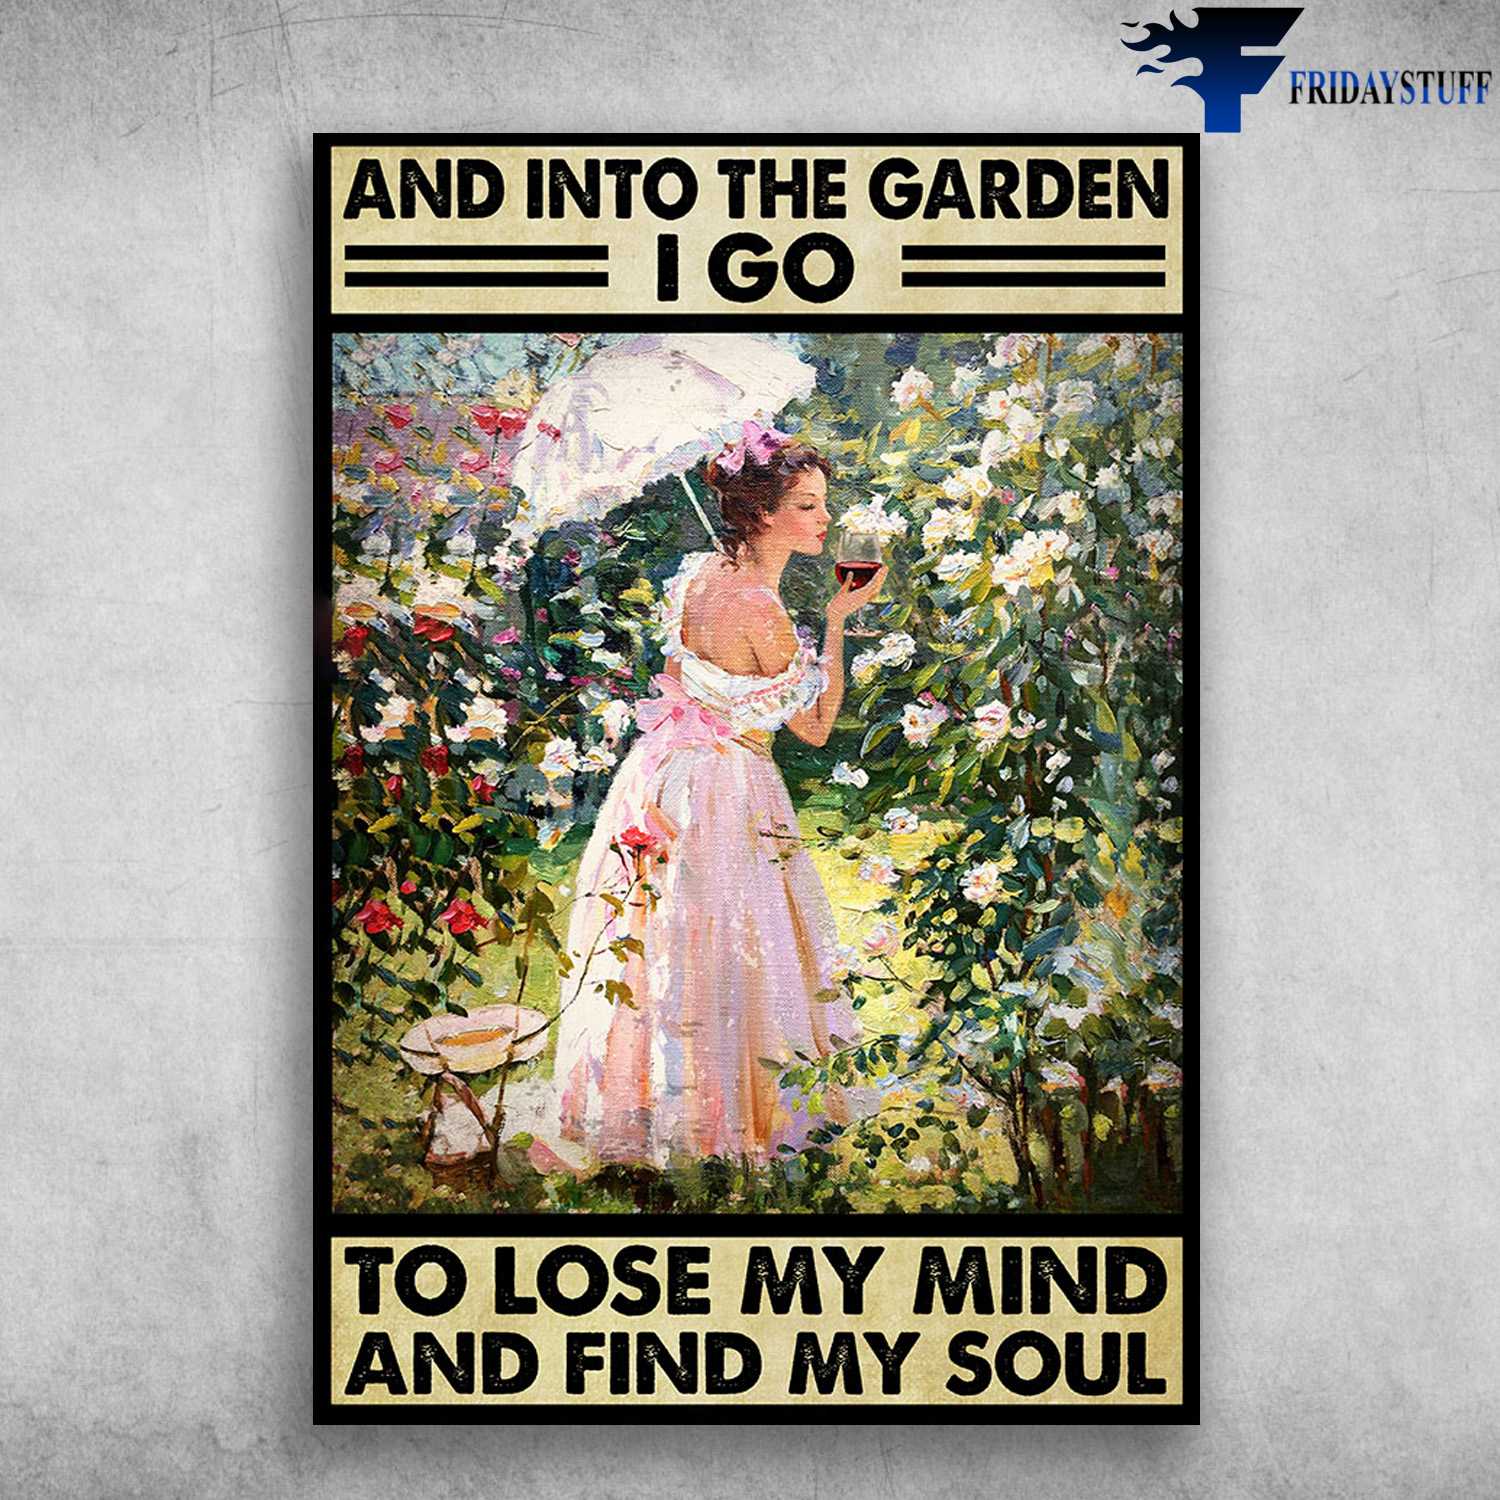 Gardening With Wine - And Into The Garden, I Go To Lose My Mind And Find My Soul